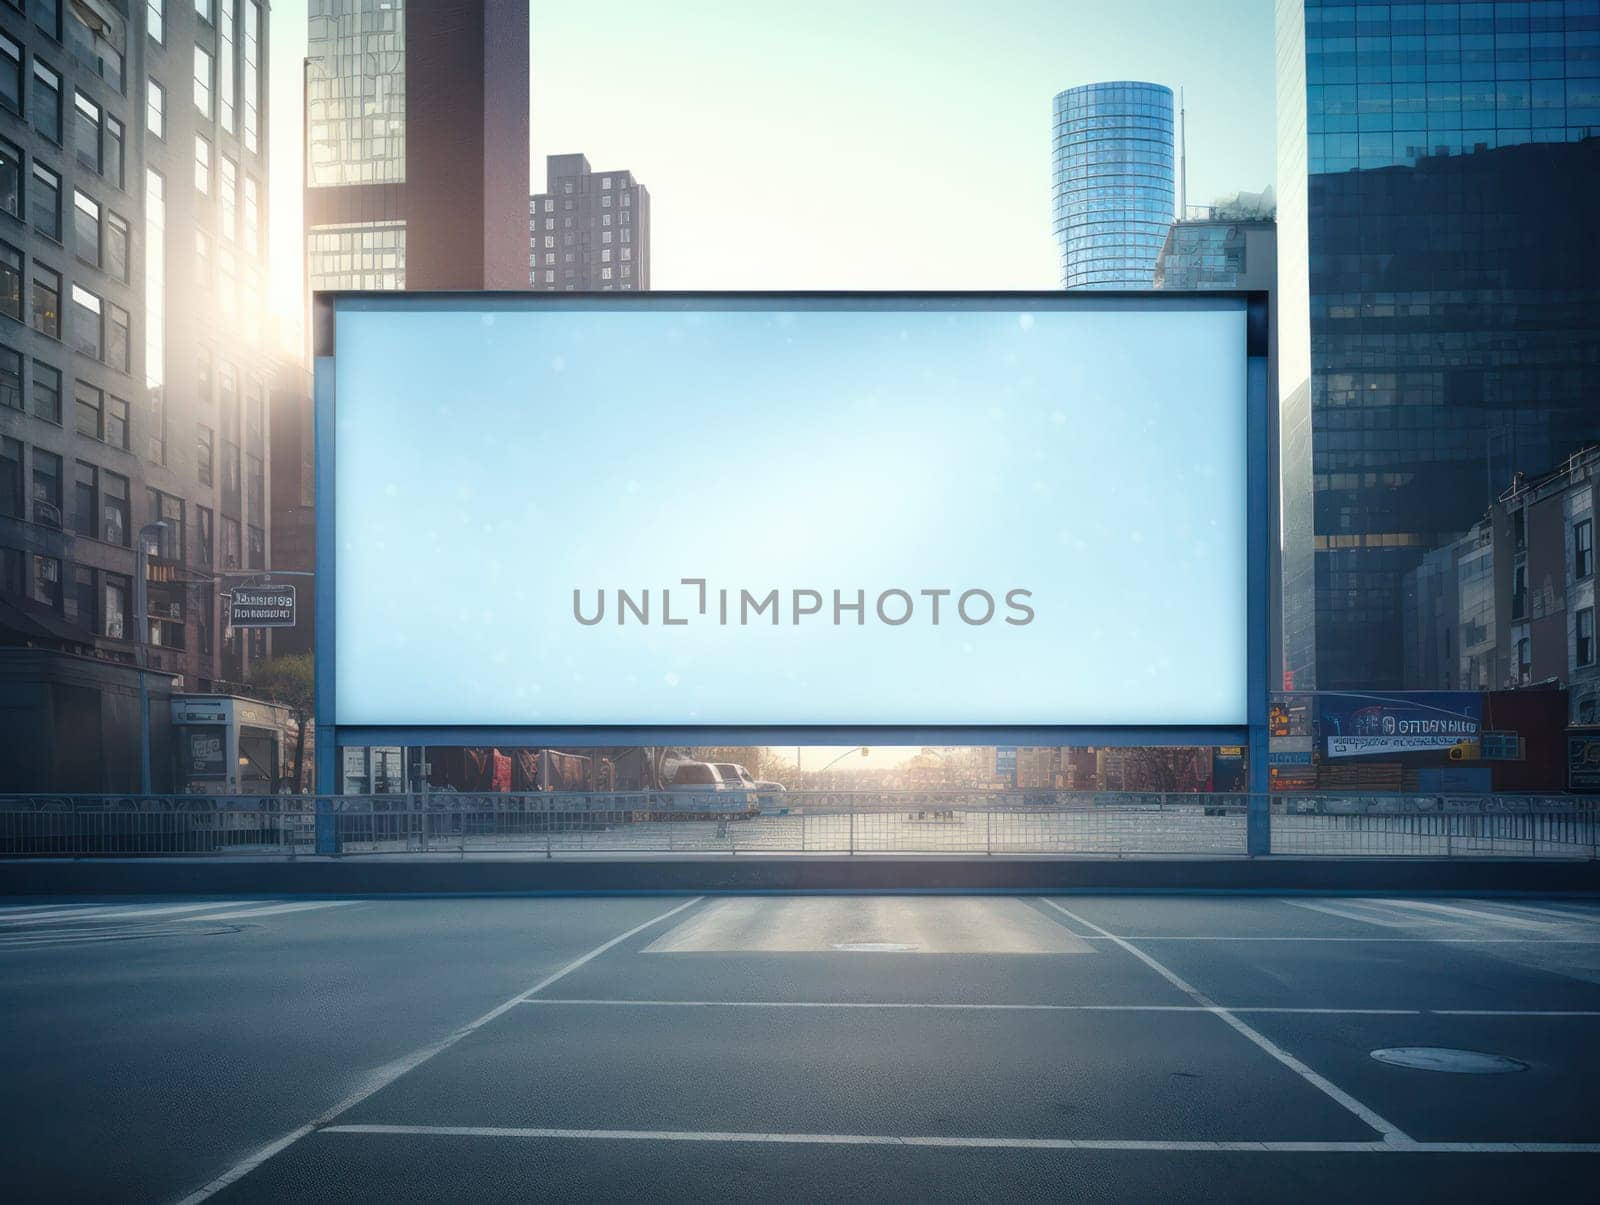 Blank Billboard in the City: A Promotional Display for Urban Advertising